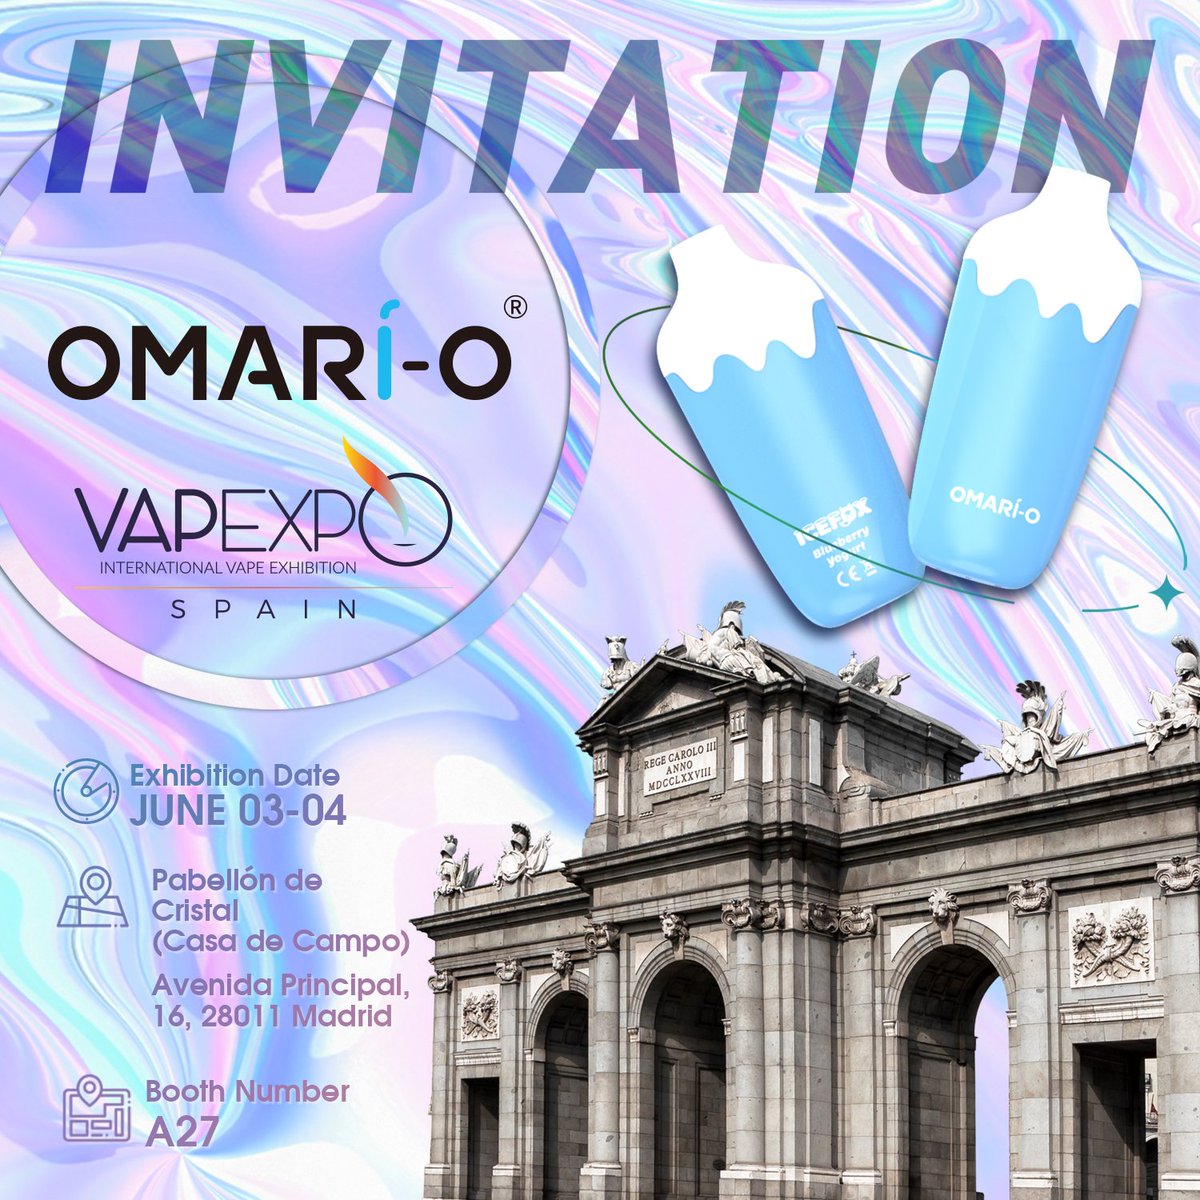 The sixth station of the OMARI-O Global Electronic Cigarette Exhibition: IFEMA, Madrid International Convention and Exhibition Center, Spain